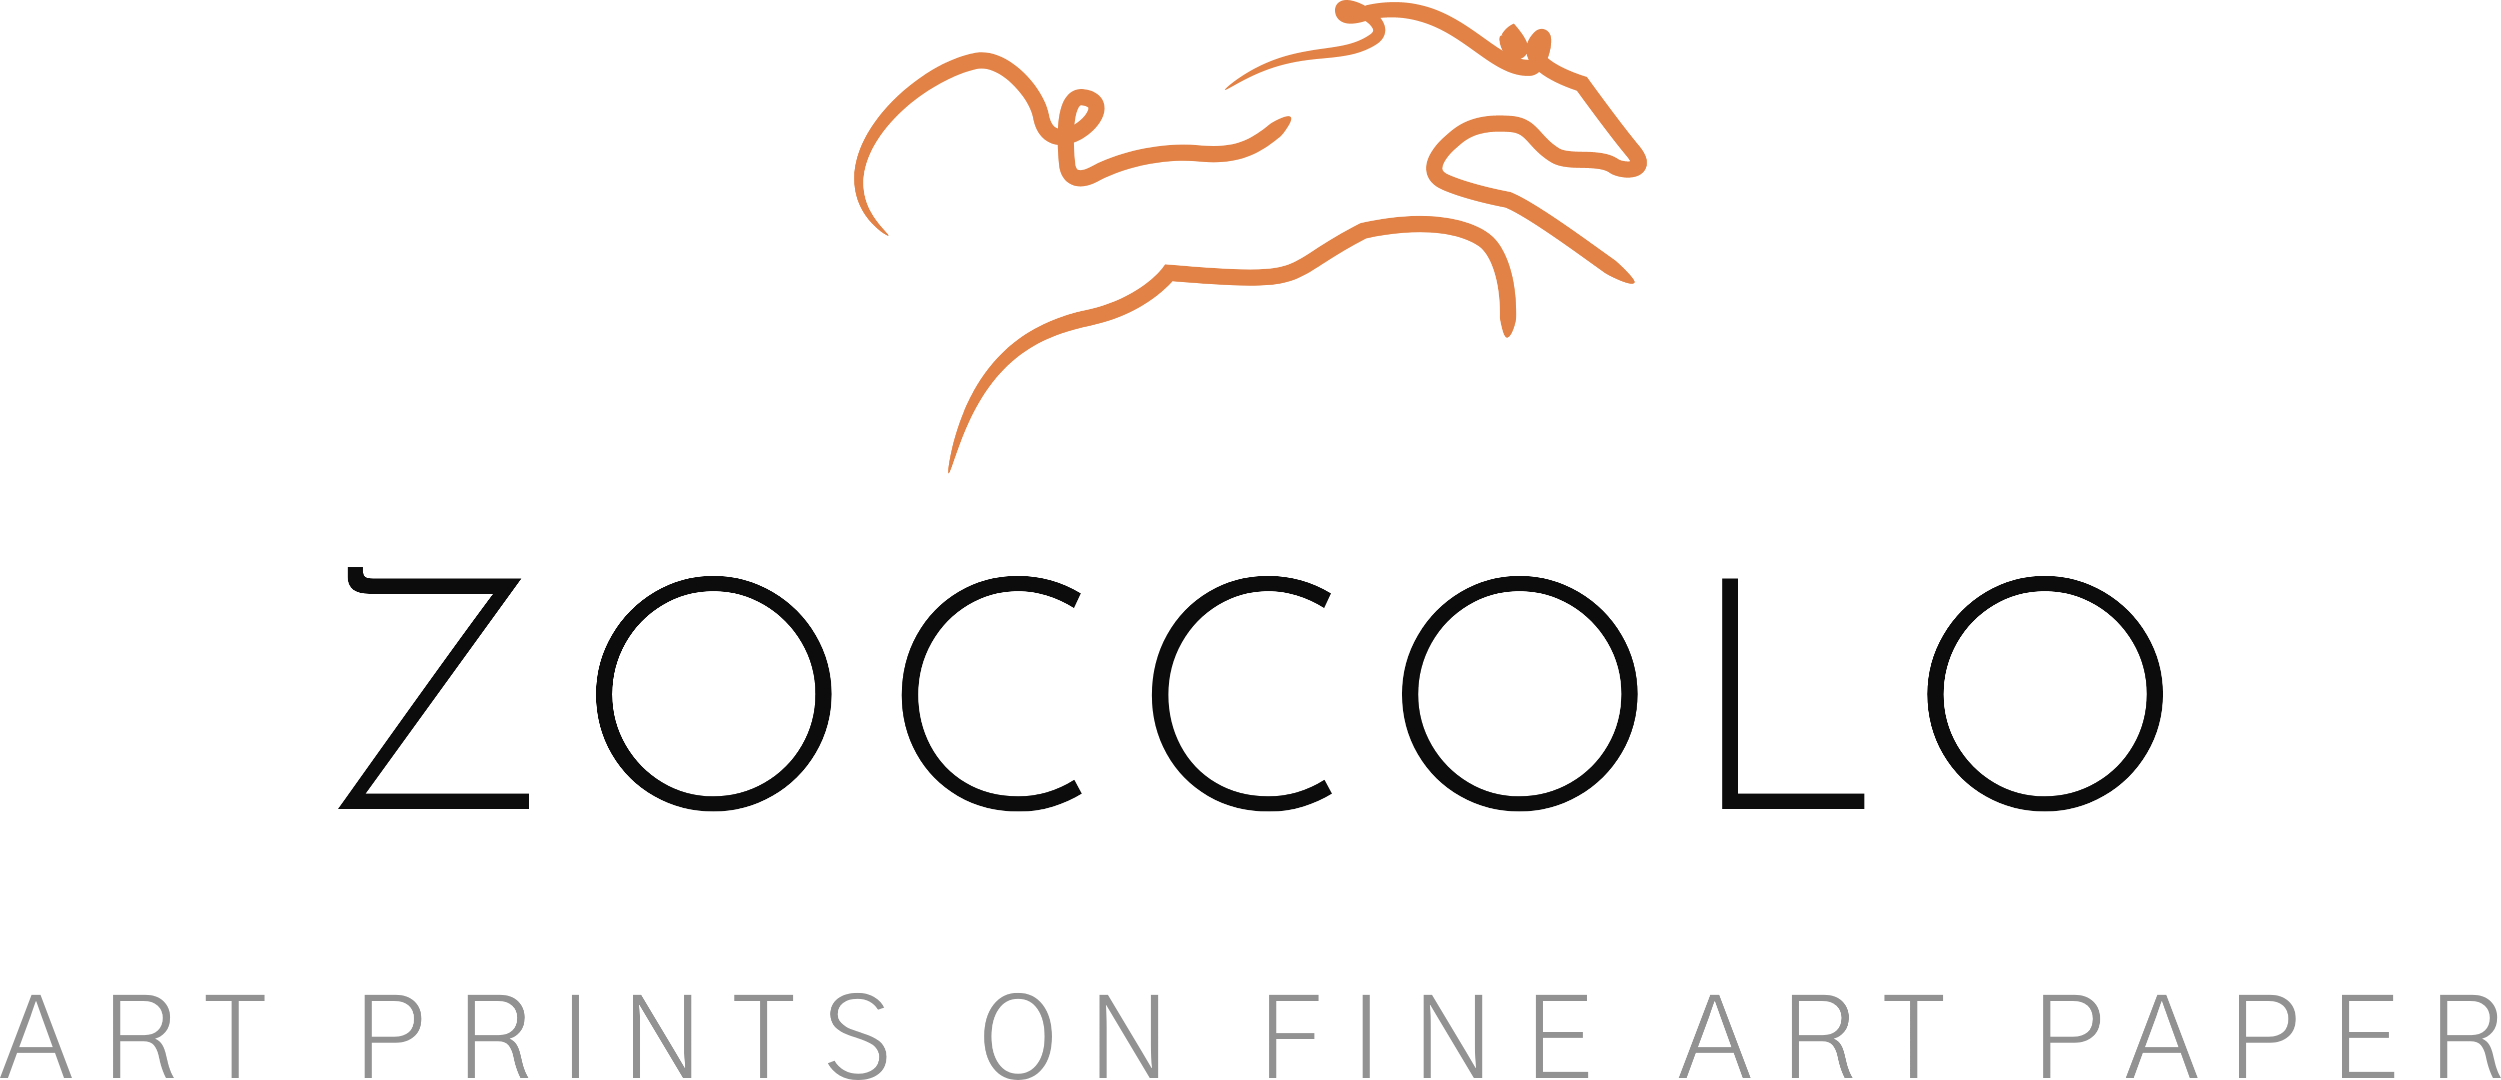 Zoccolo Brand Name, tag line reads Art Prints on Fine Art Paper, and Logo of Horse